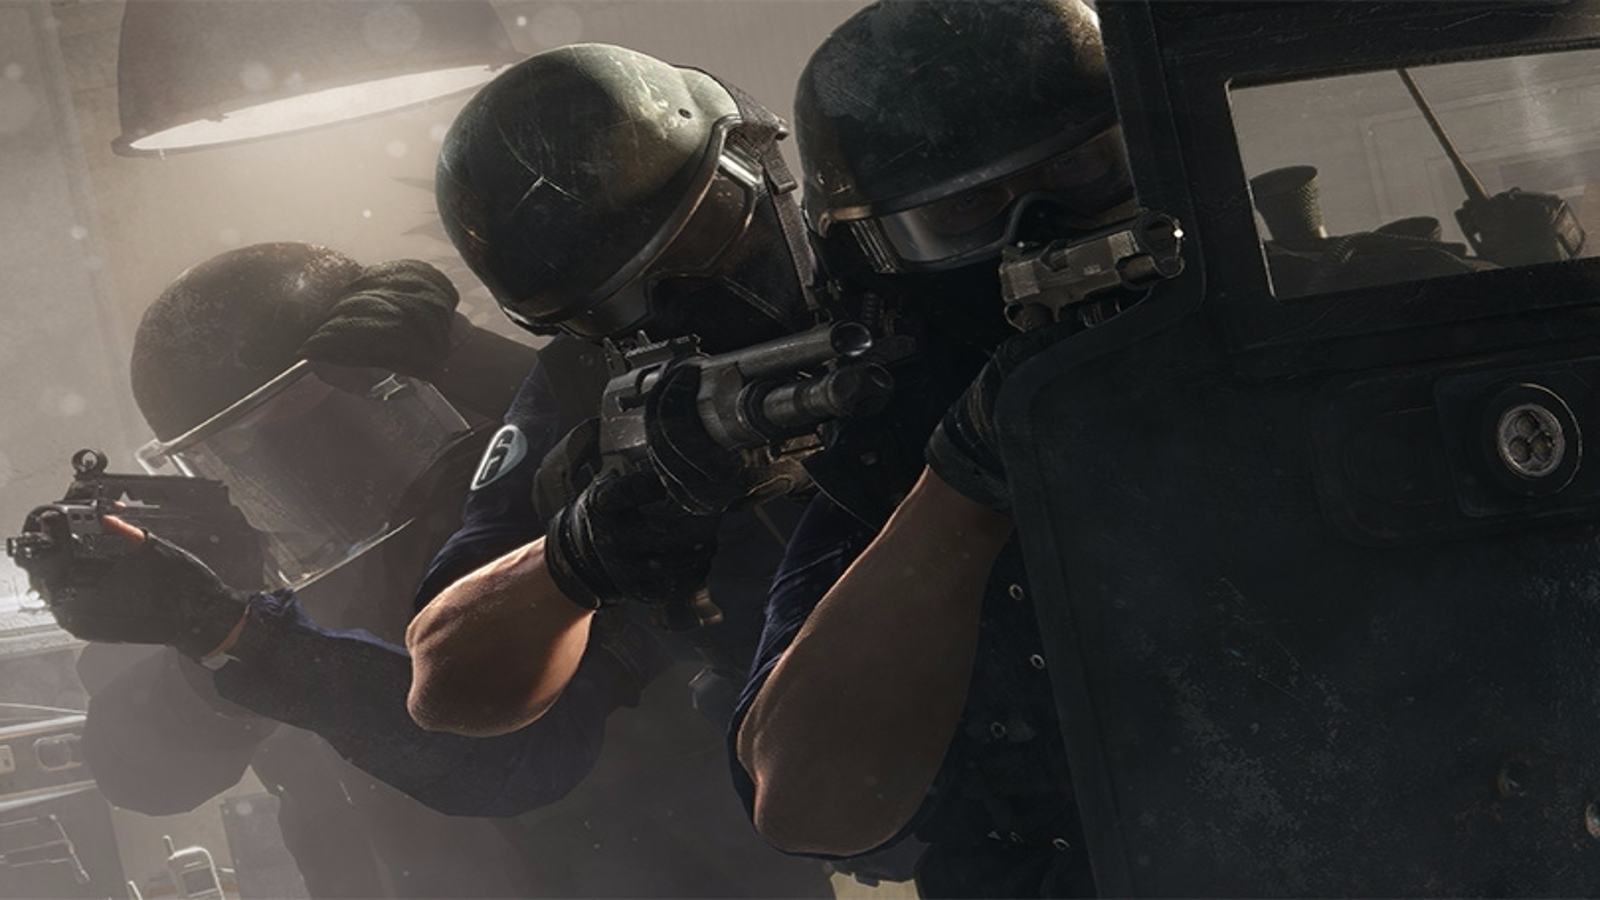 The best games of 2017: Rainbow Six Siege